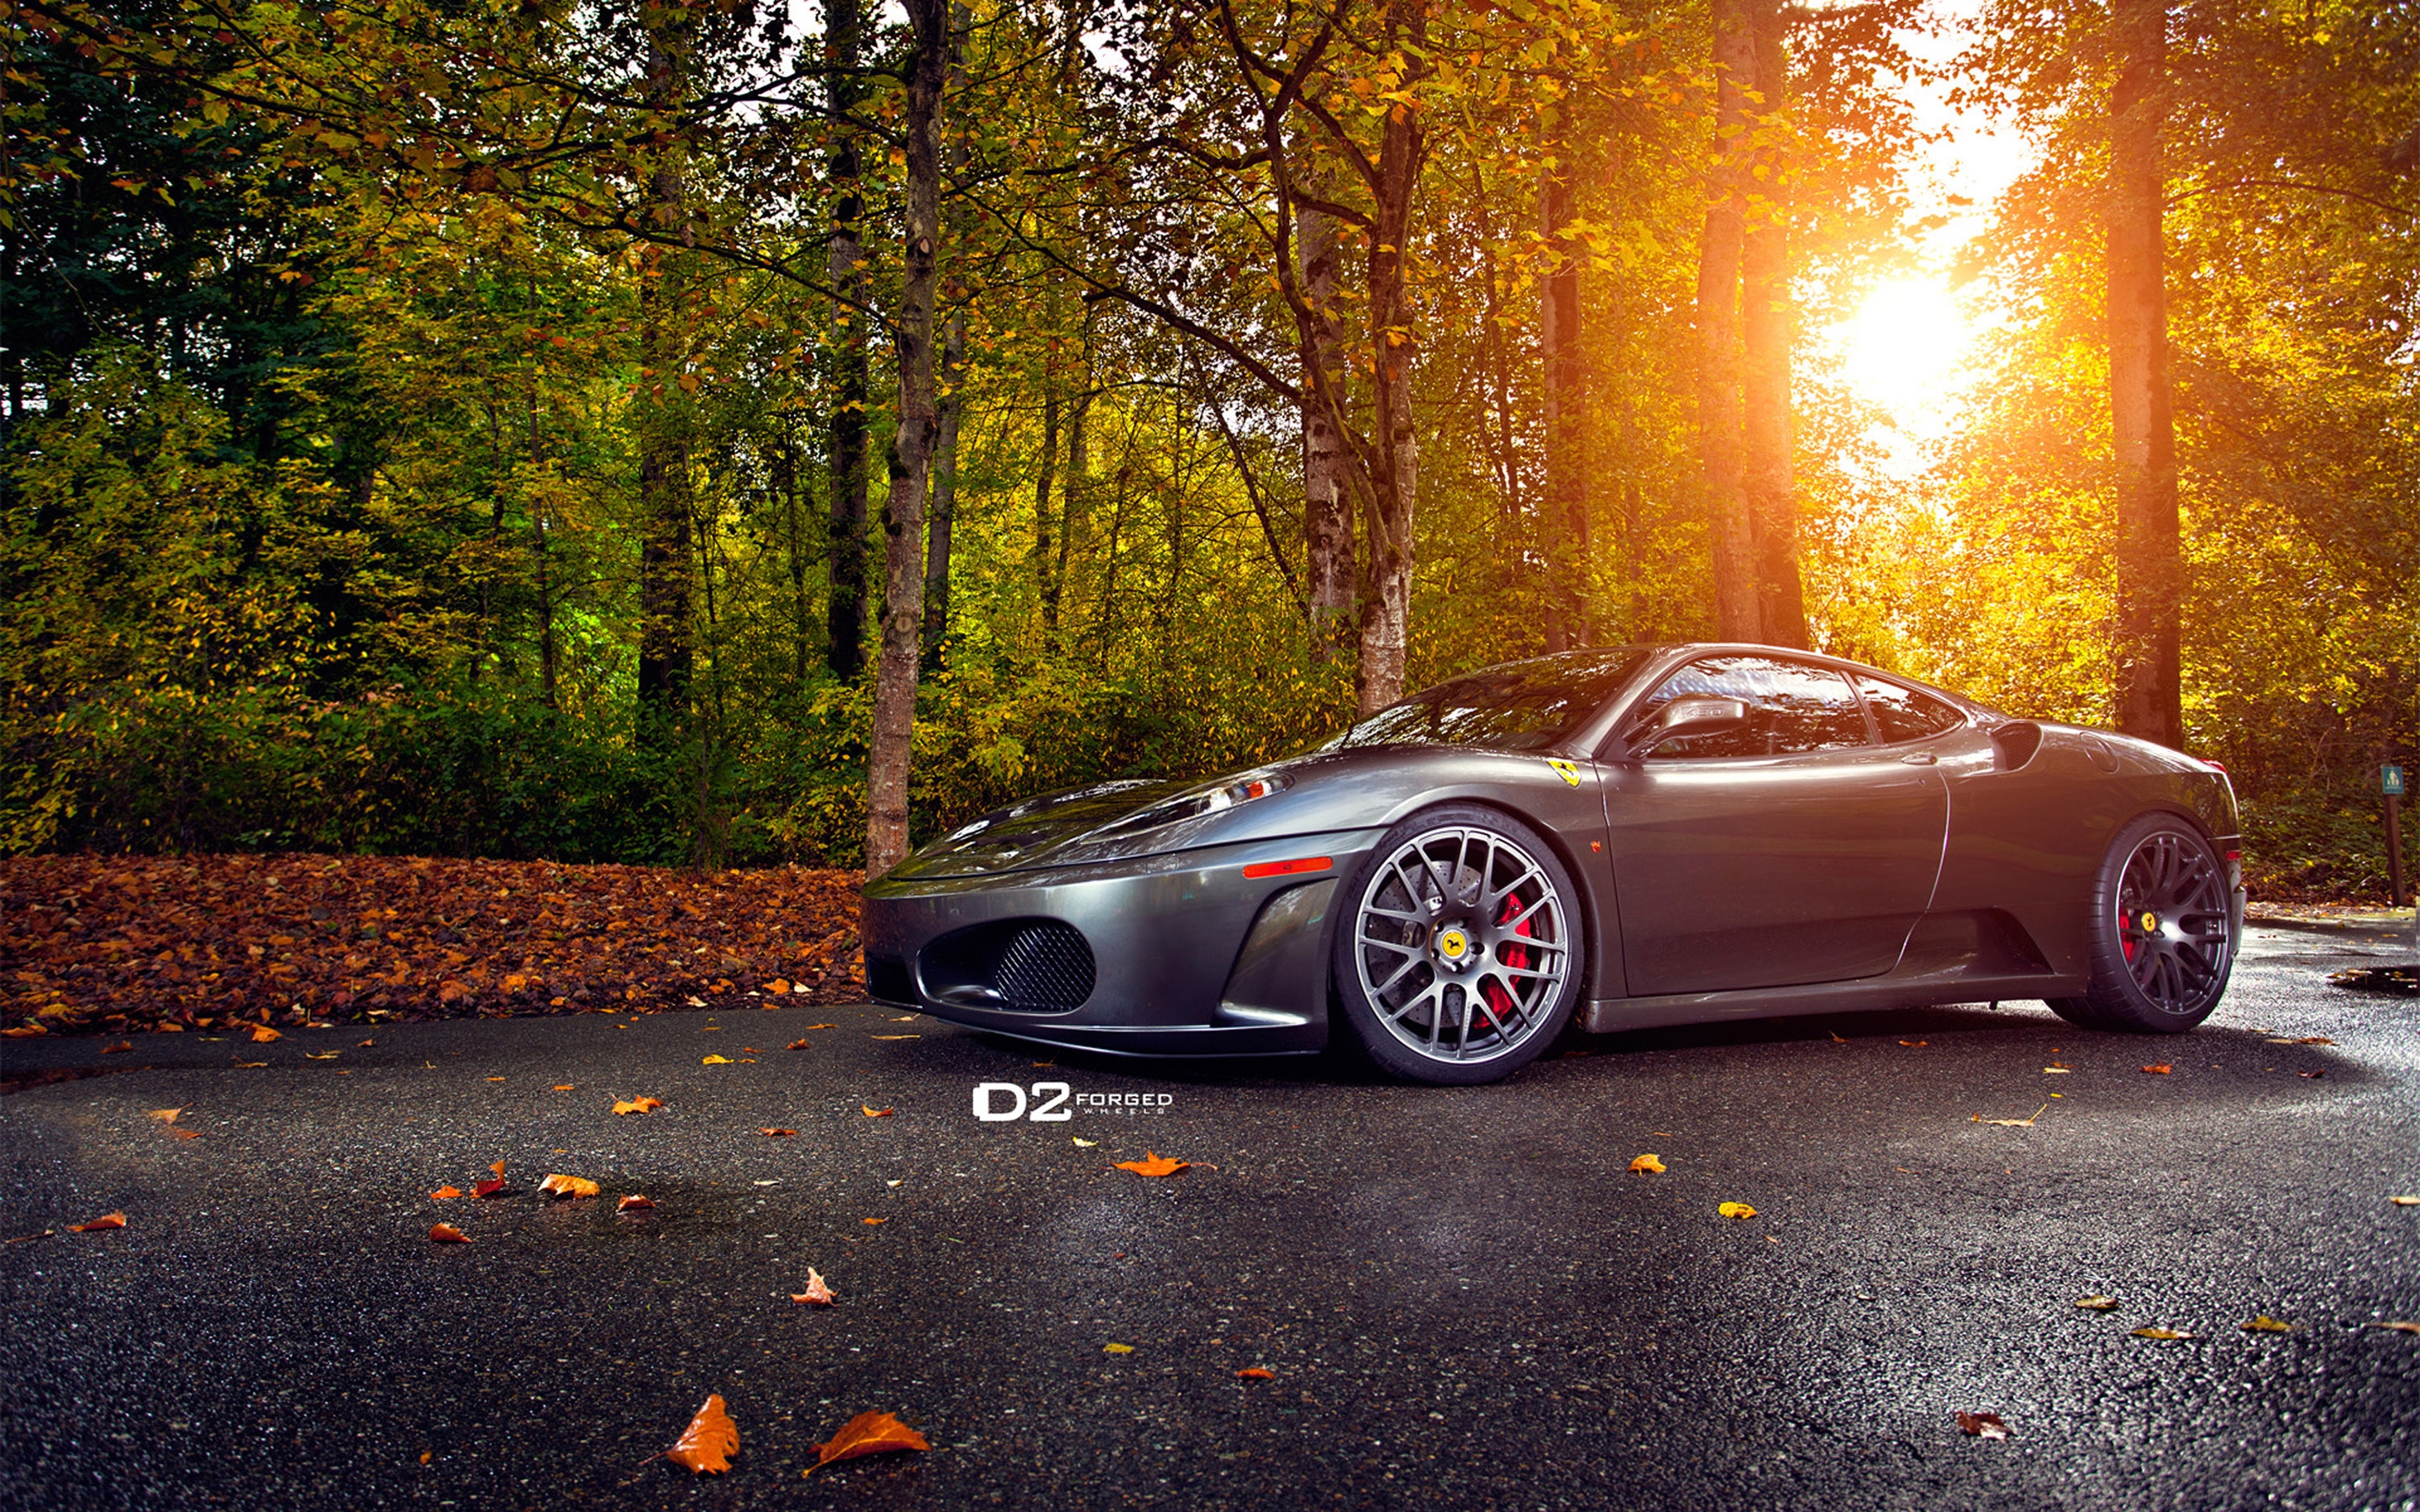 Amazing Ferrari by D2Forged for 2880 x 1800 Retina Display resolution